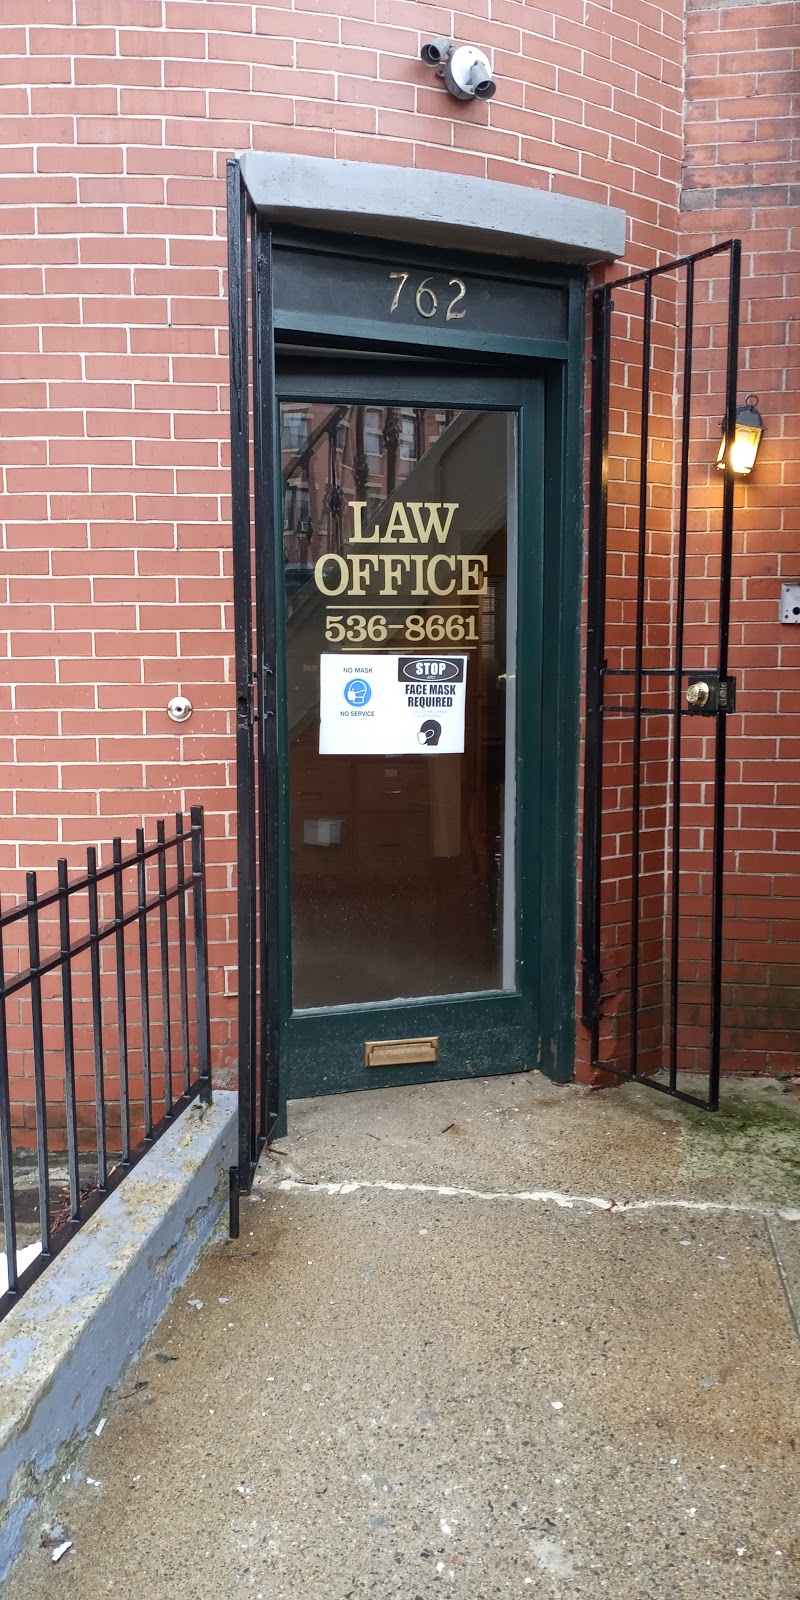 Law Office of Barry Stephen Kane, P.C. | 762 Tremont St #2, Boston, MA 02118, USA | Phone: (617) 536-8661